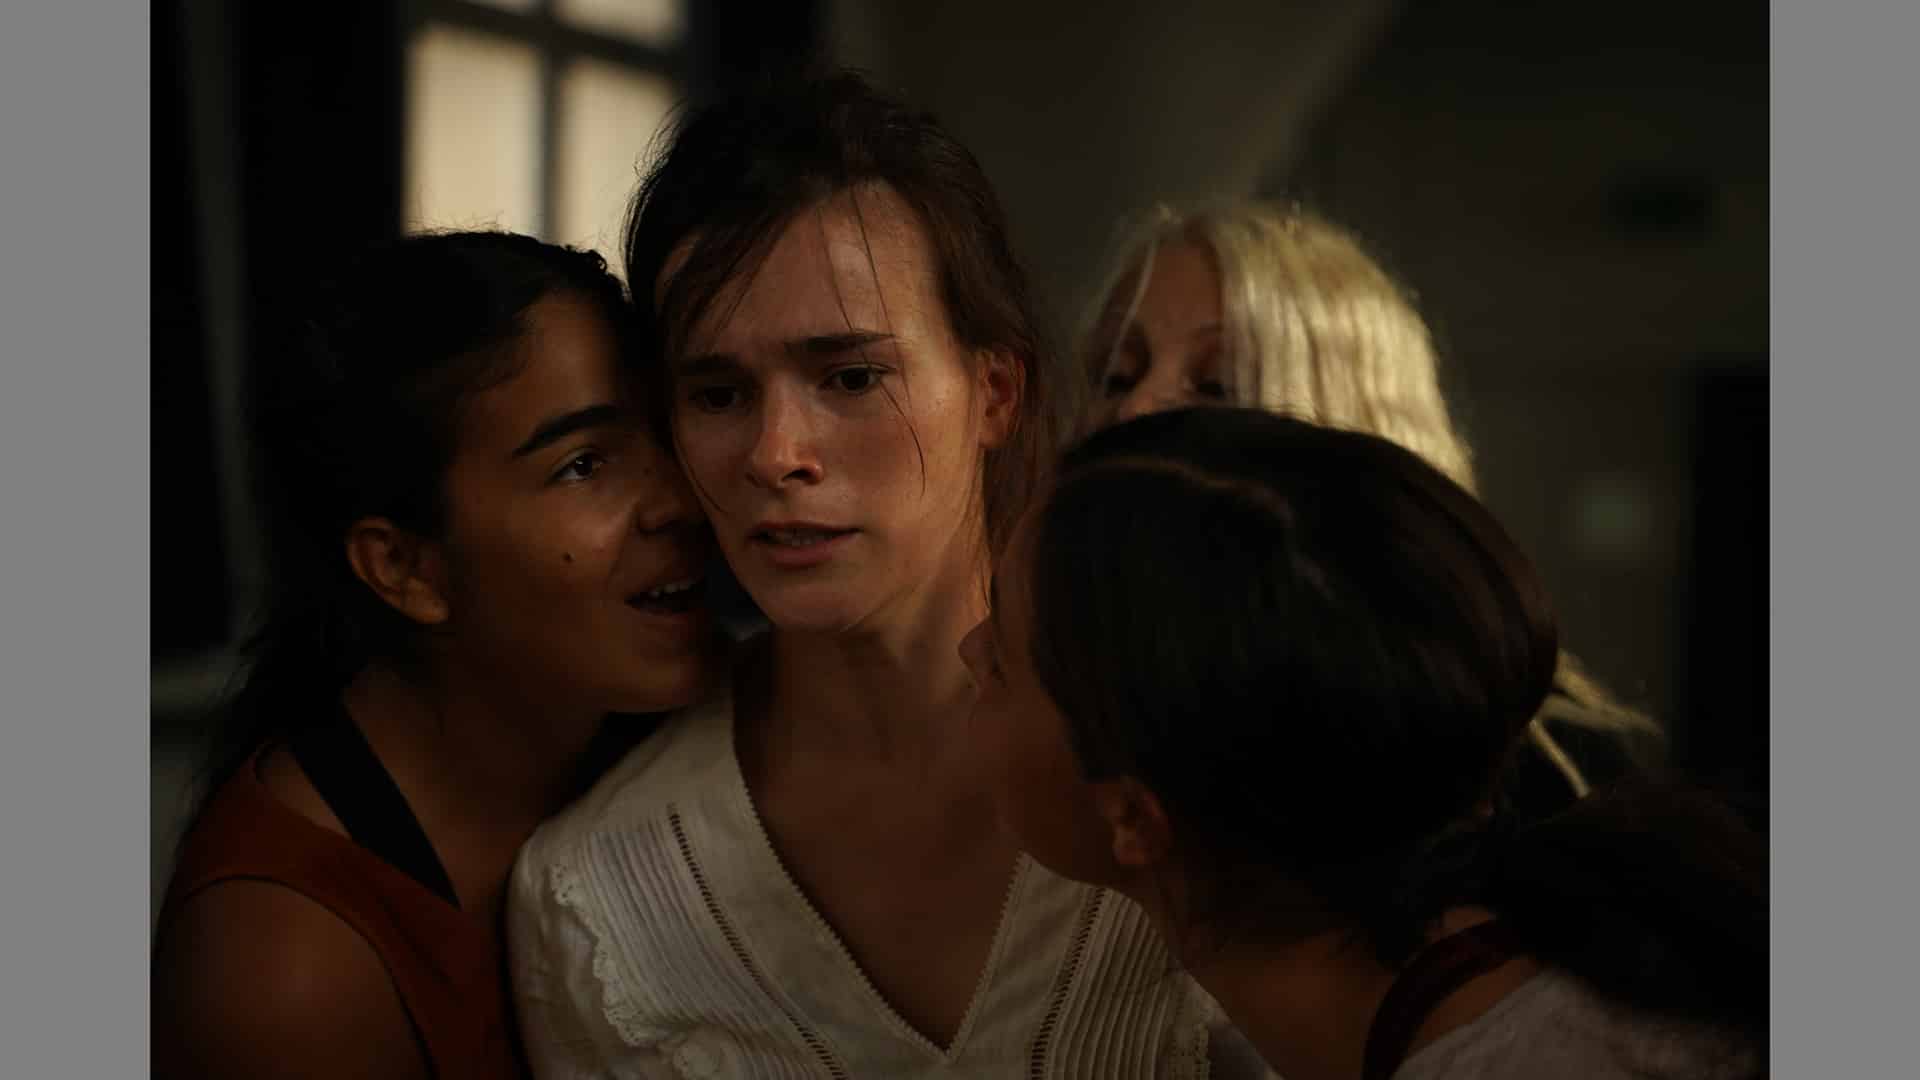 A grounp of three women gather around a central woman who looks shocked